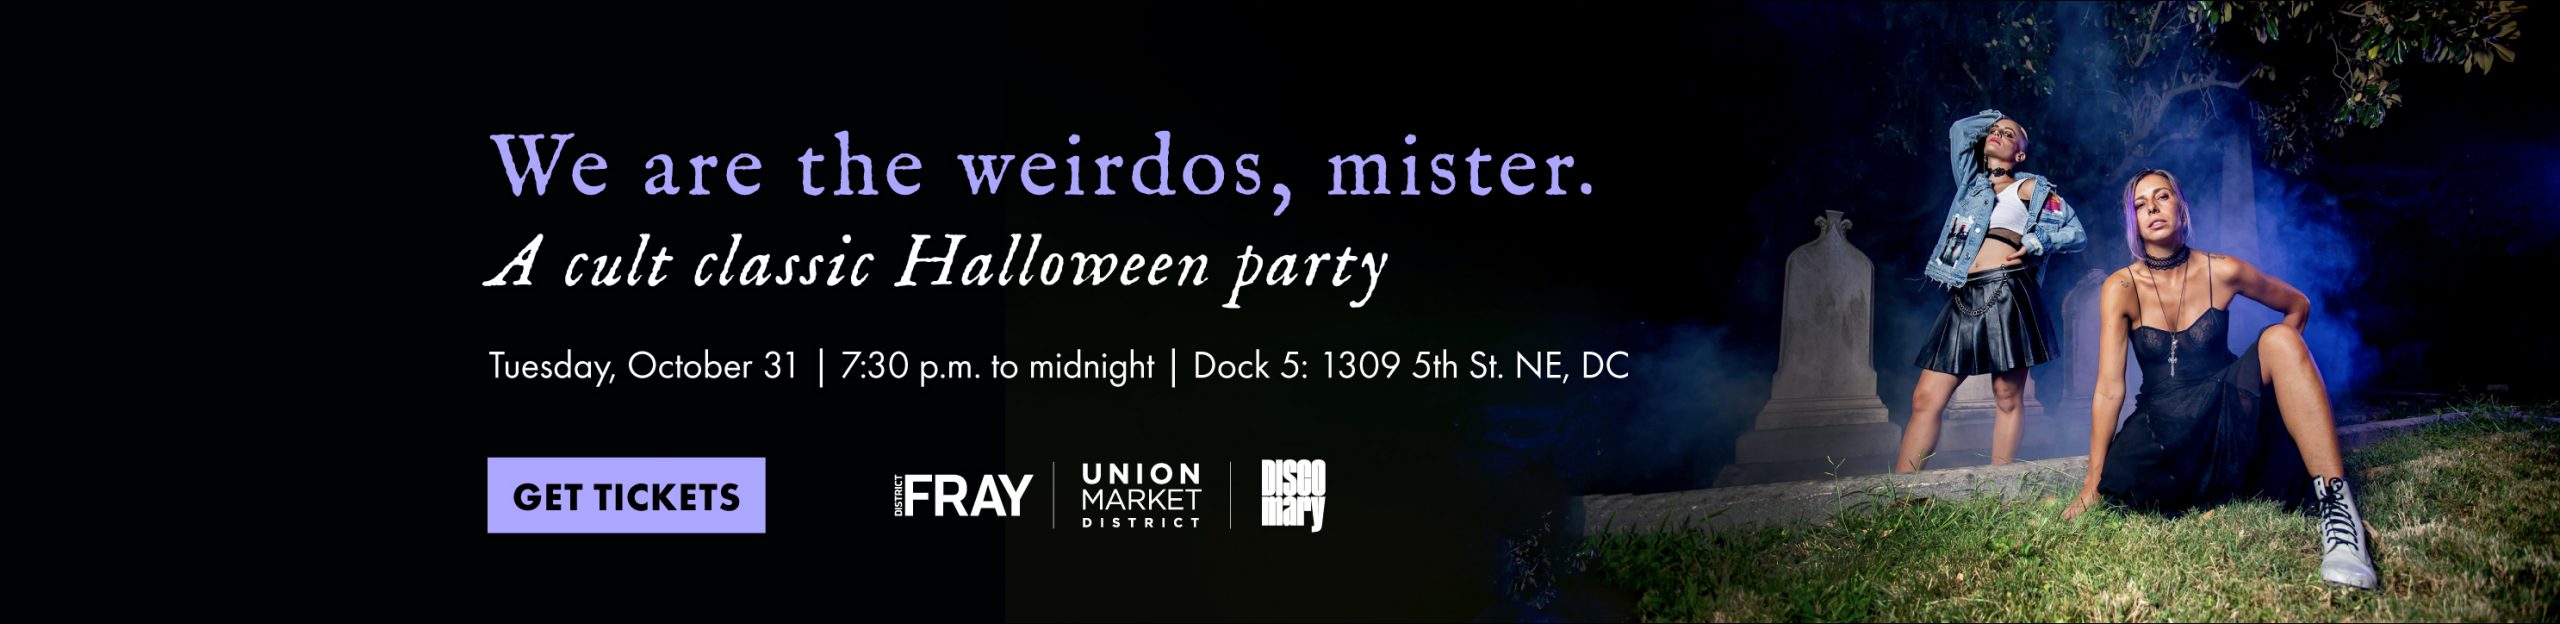 We Are the Weirdos, Mister: District Fray’s Cult Classic Halloween Party